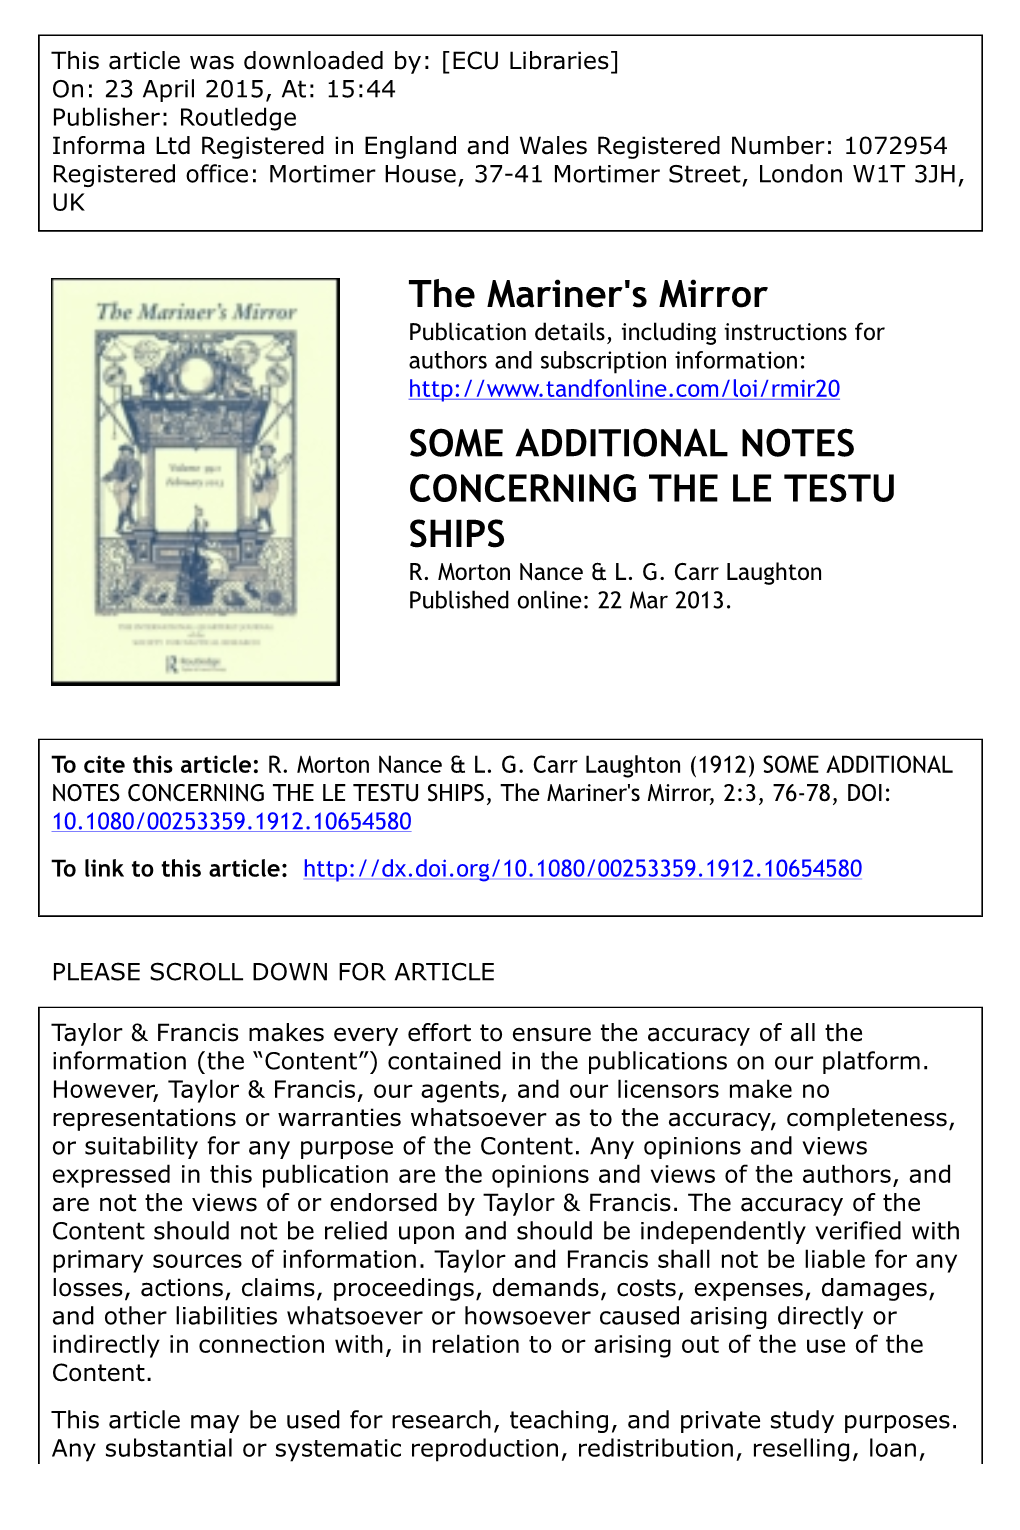 The Mariner's Mirror SOME ADDITIONAL NOTES CONCERNING the LE TESTU SHIPS